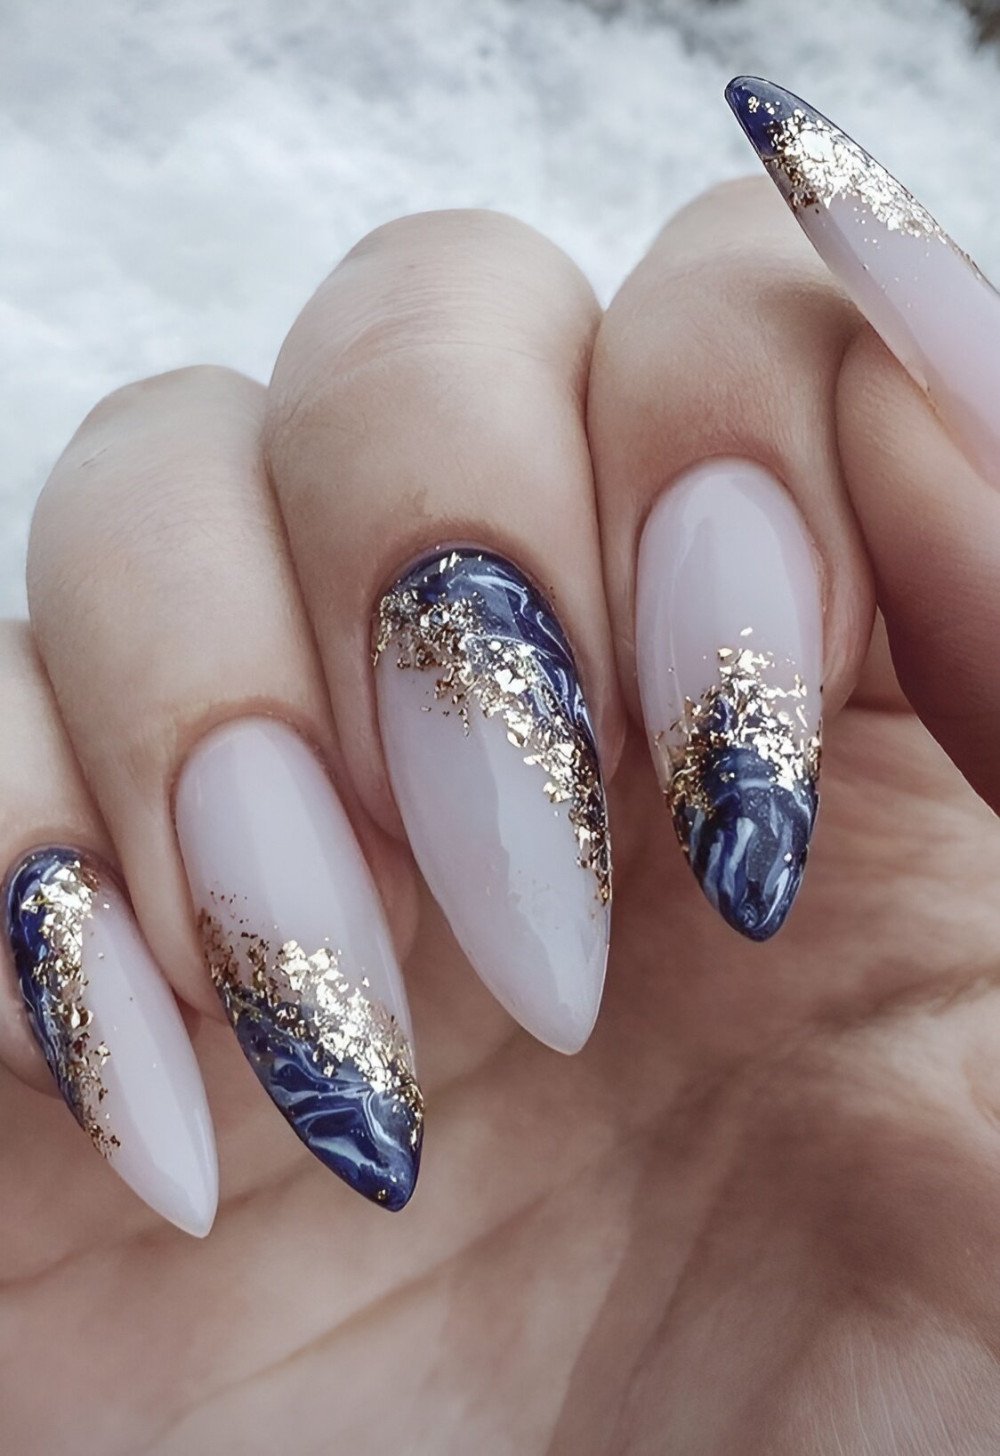 35 Breathtaking Nail Design Ideas For The Perfect Manicure - 239